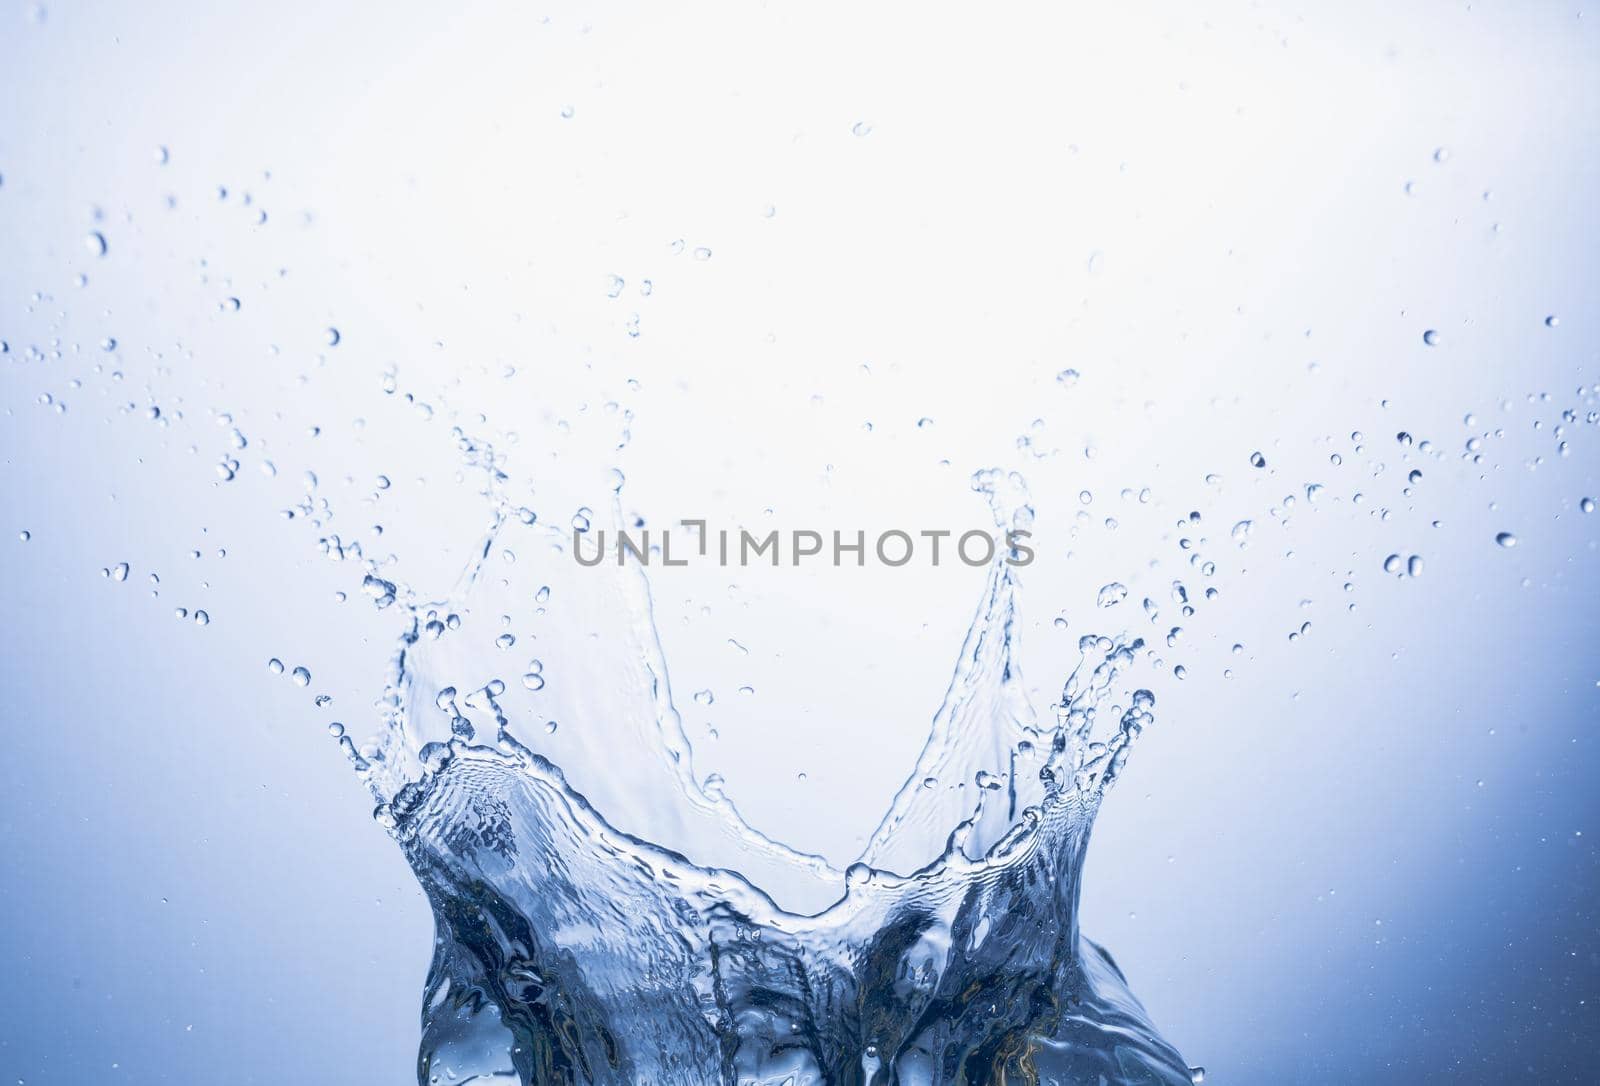 Water splash on blue abstract background